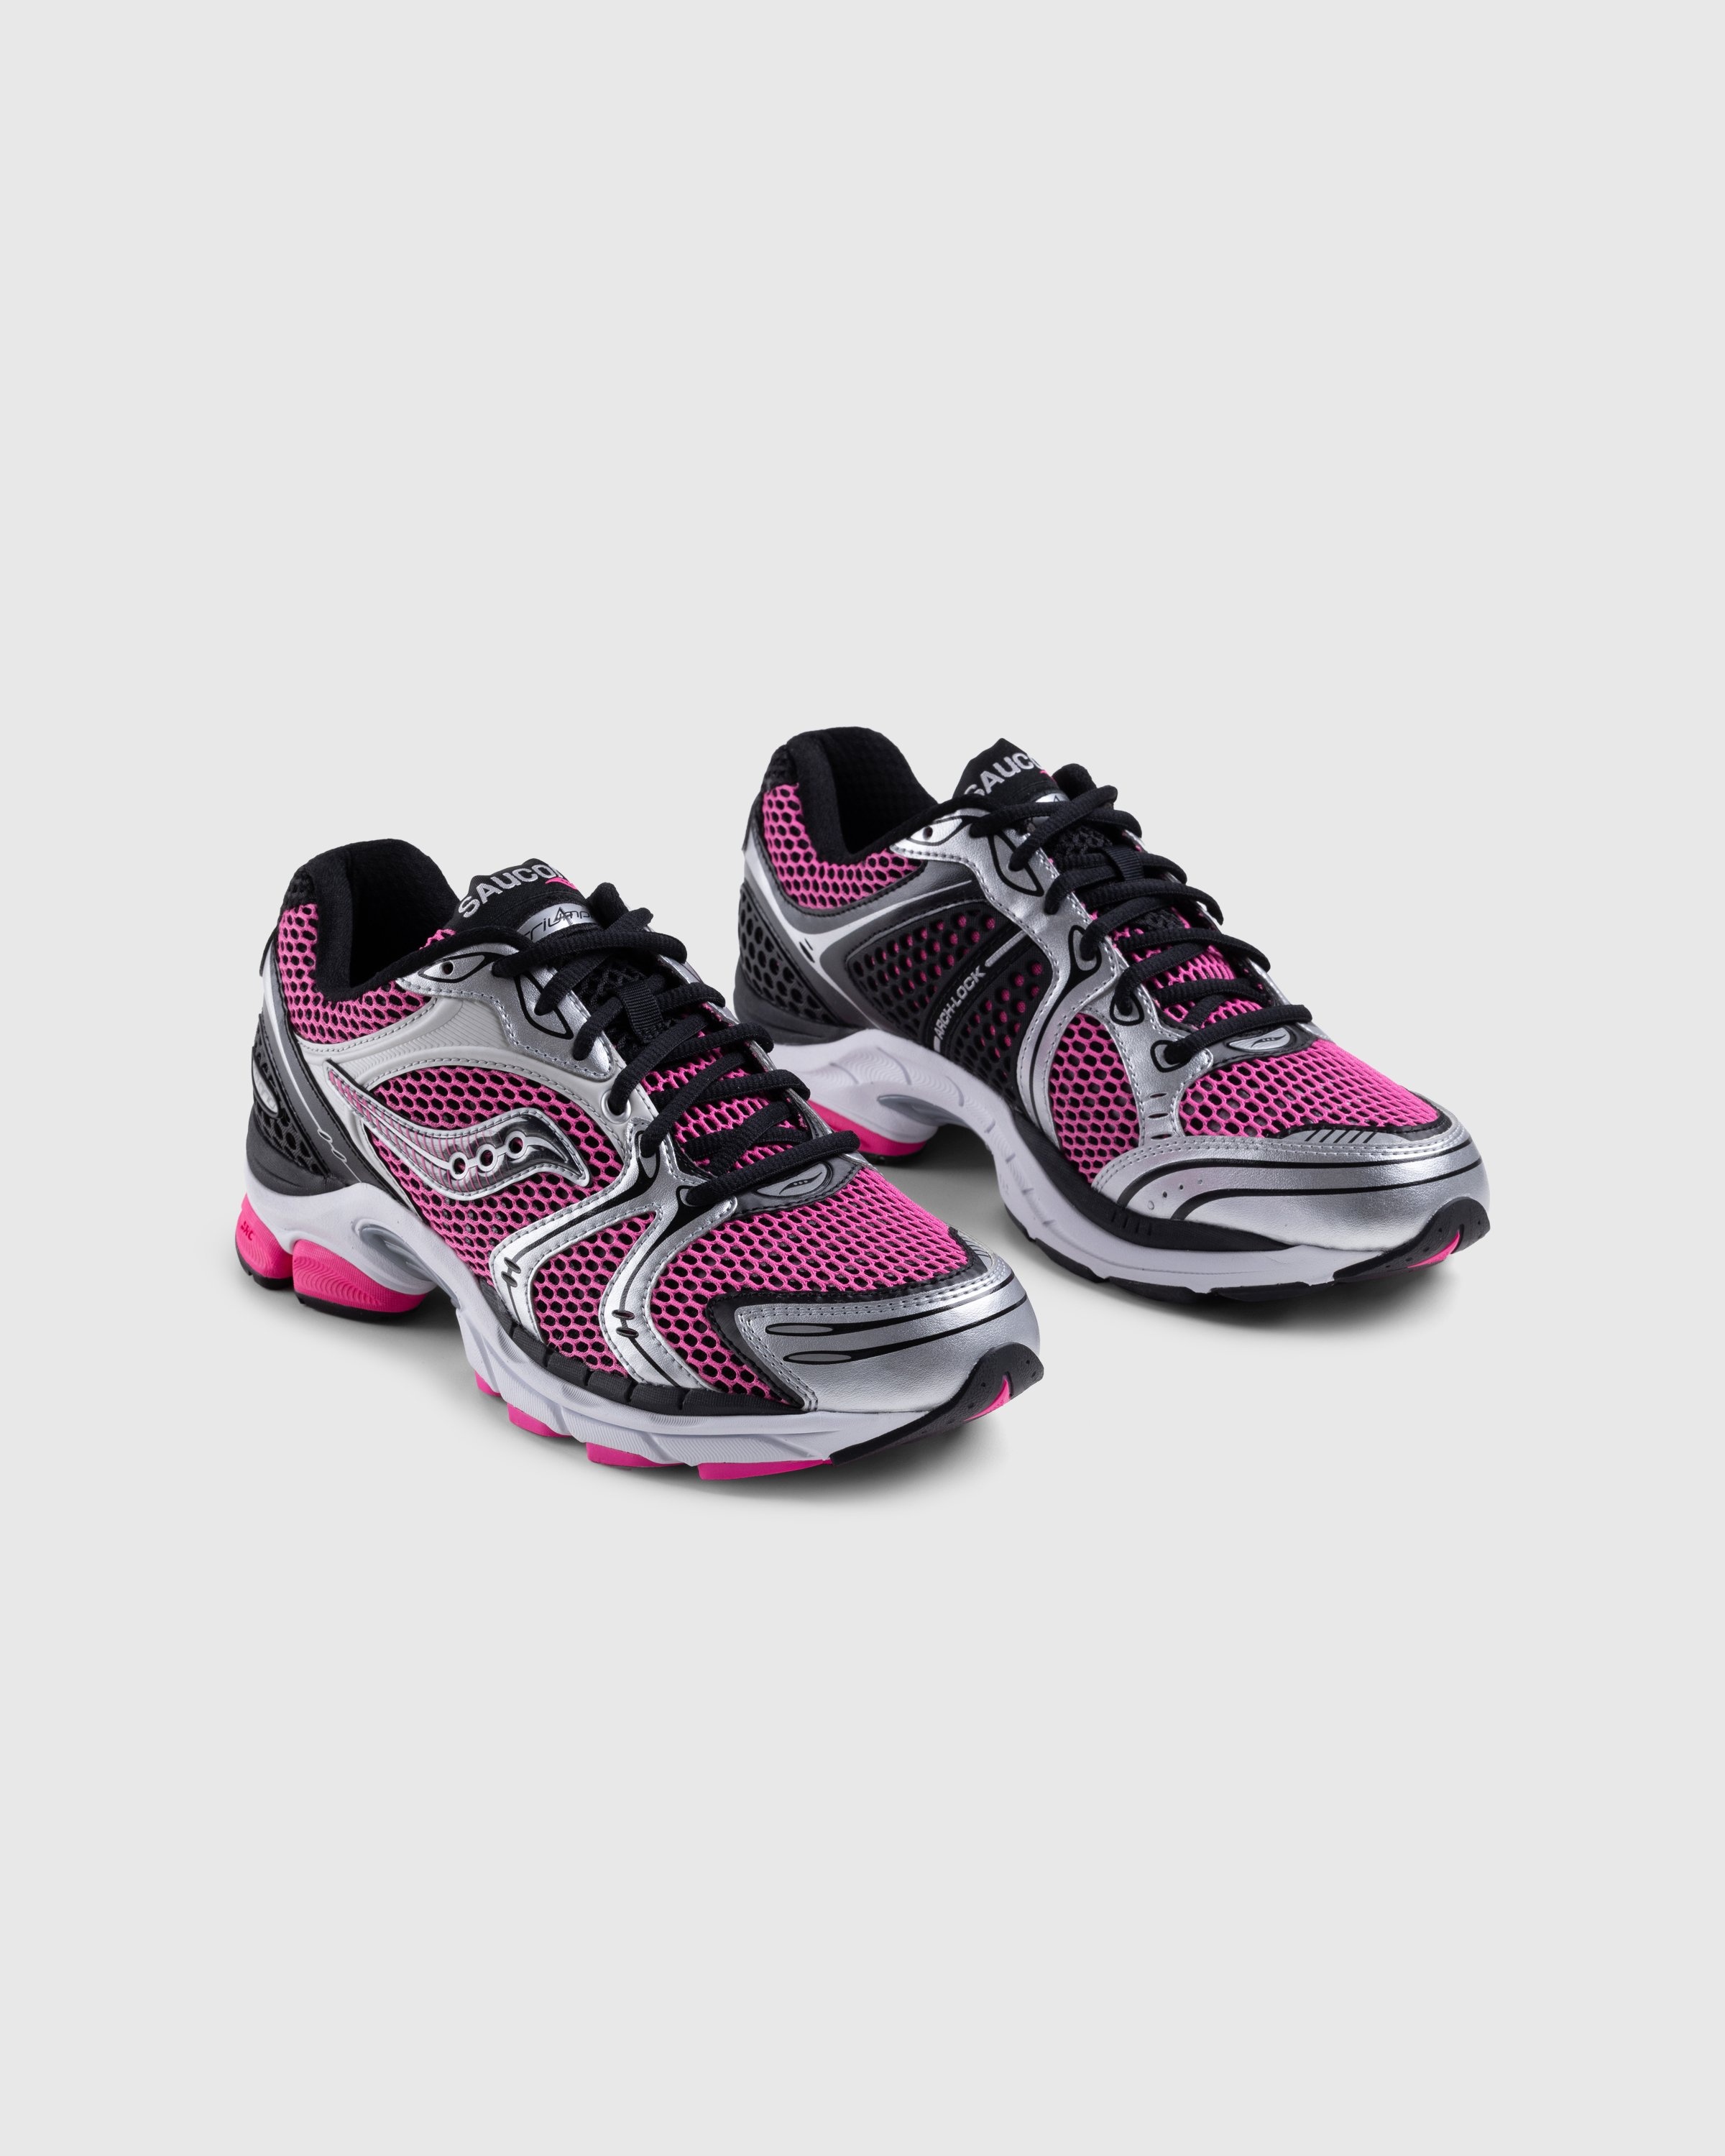 Saucony – ProGrid Triumph 4 Pink/Silver - Sneakers - Multi - Image 3